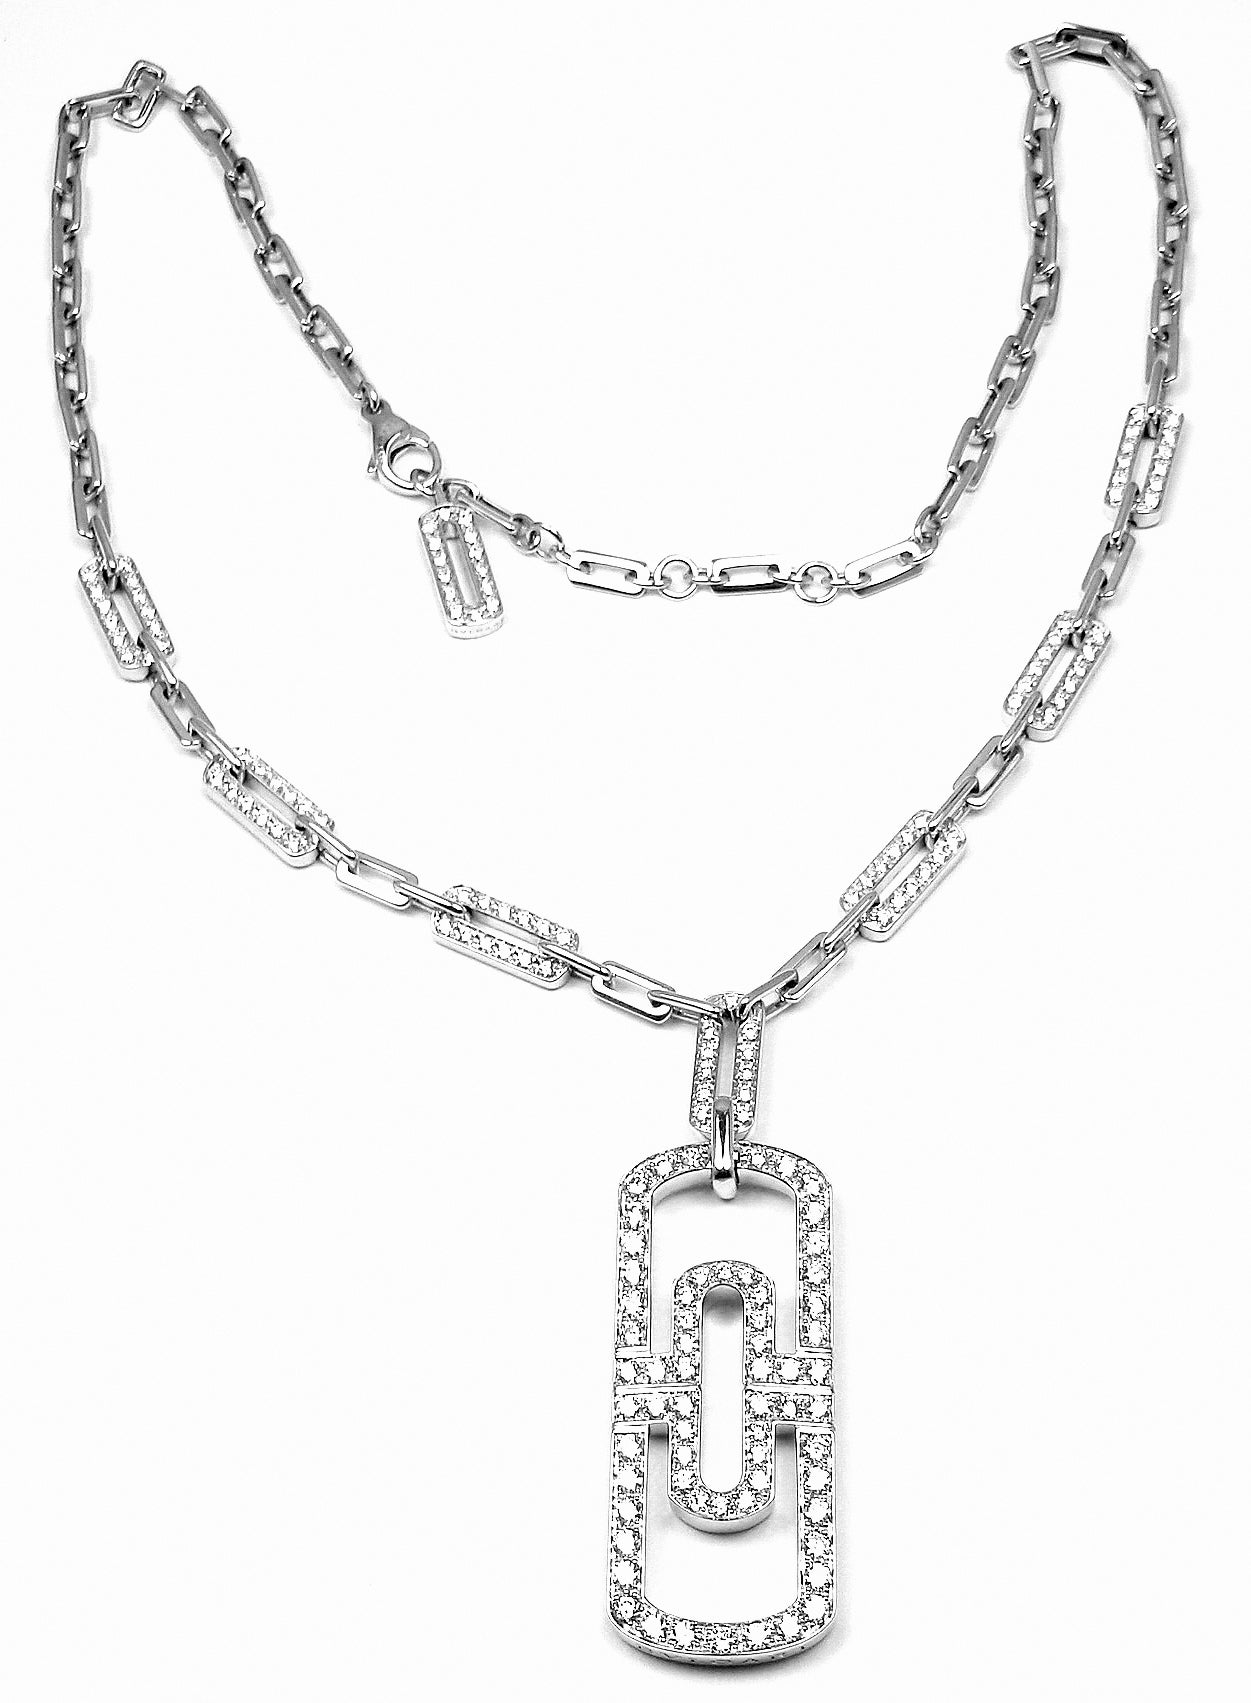 18k White Gold Pave Diamond Parentesi Pendant Necklace by Bulgari. 
With 173 round cut diamonds
total weight approx 3.5ct VS1 clarity, G color 
This necklace comes with original Bulgari box and Bulgari certificate.

Details:
Weight: 50.3